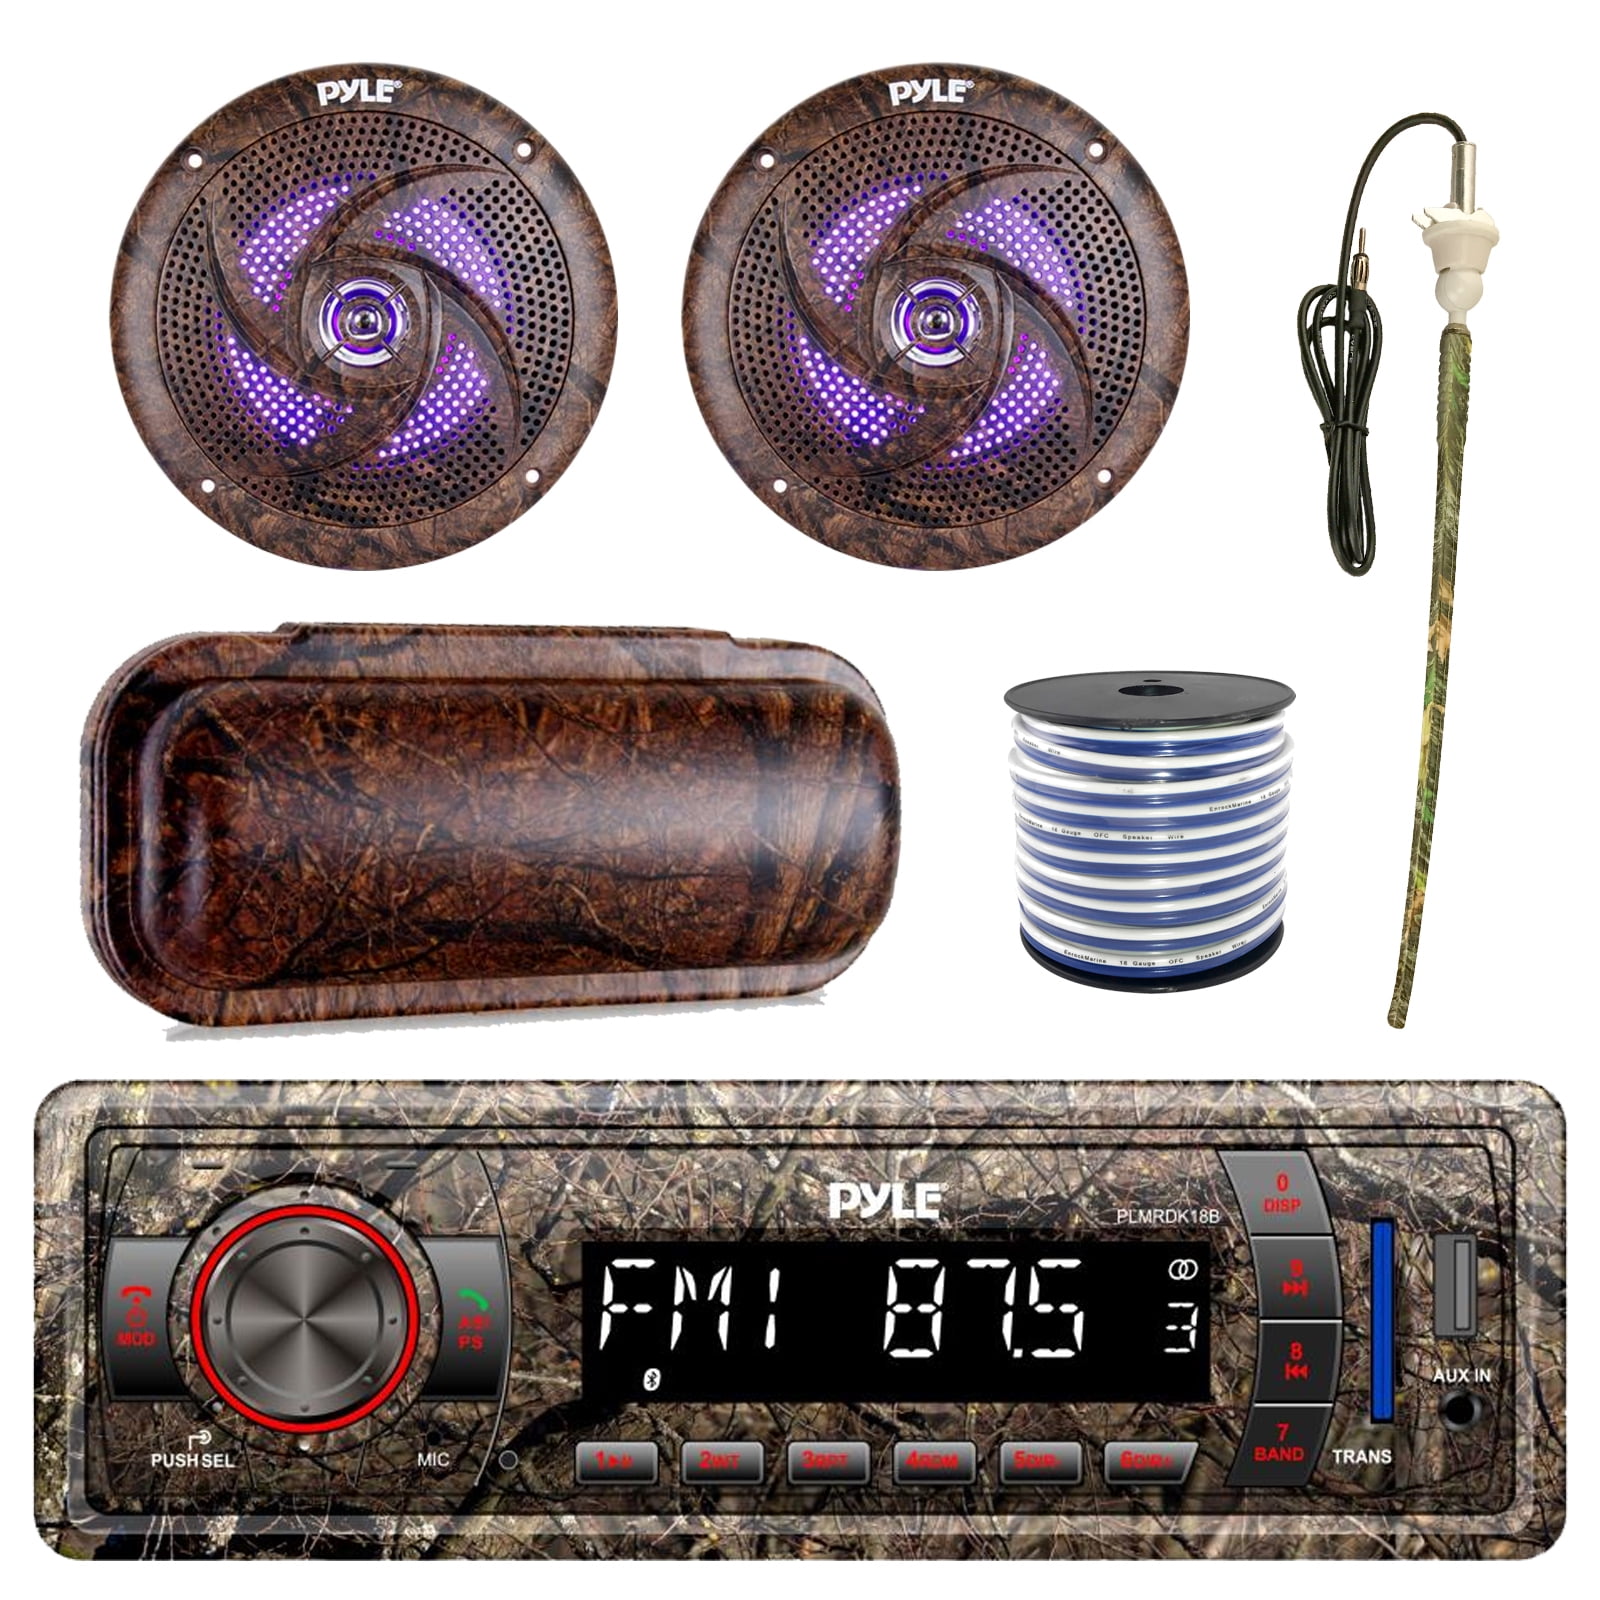 Pyle Marine Single-DIN Bluetooth MP3 USB AUX Camo AM/FM Radio, Pyle 6.5" Waterproof Camo 240 Watt LED Speakers (Pair), Stereo Shield Cover, Enrock Camouflage Boat Antenna, 18-G 50 Ft Wire